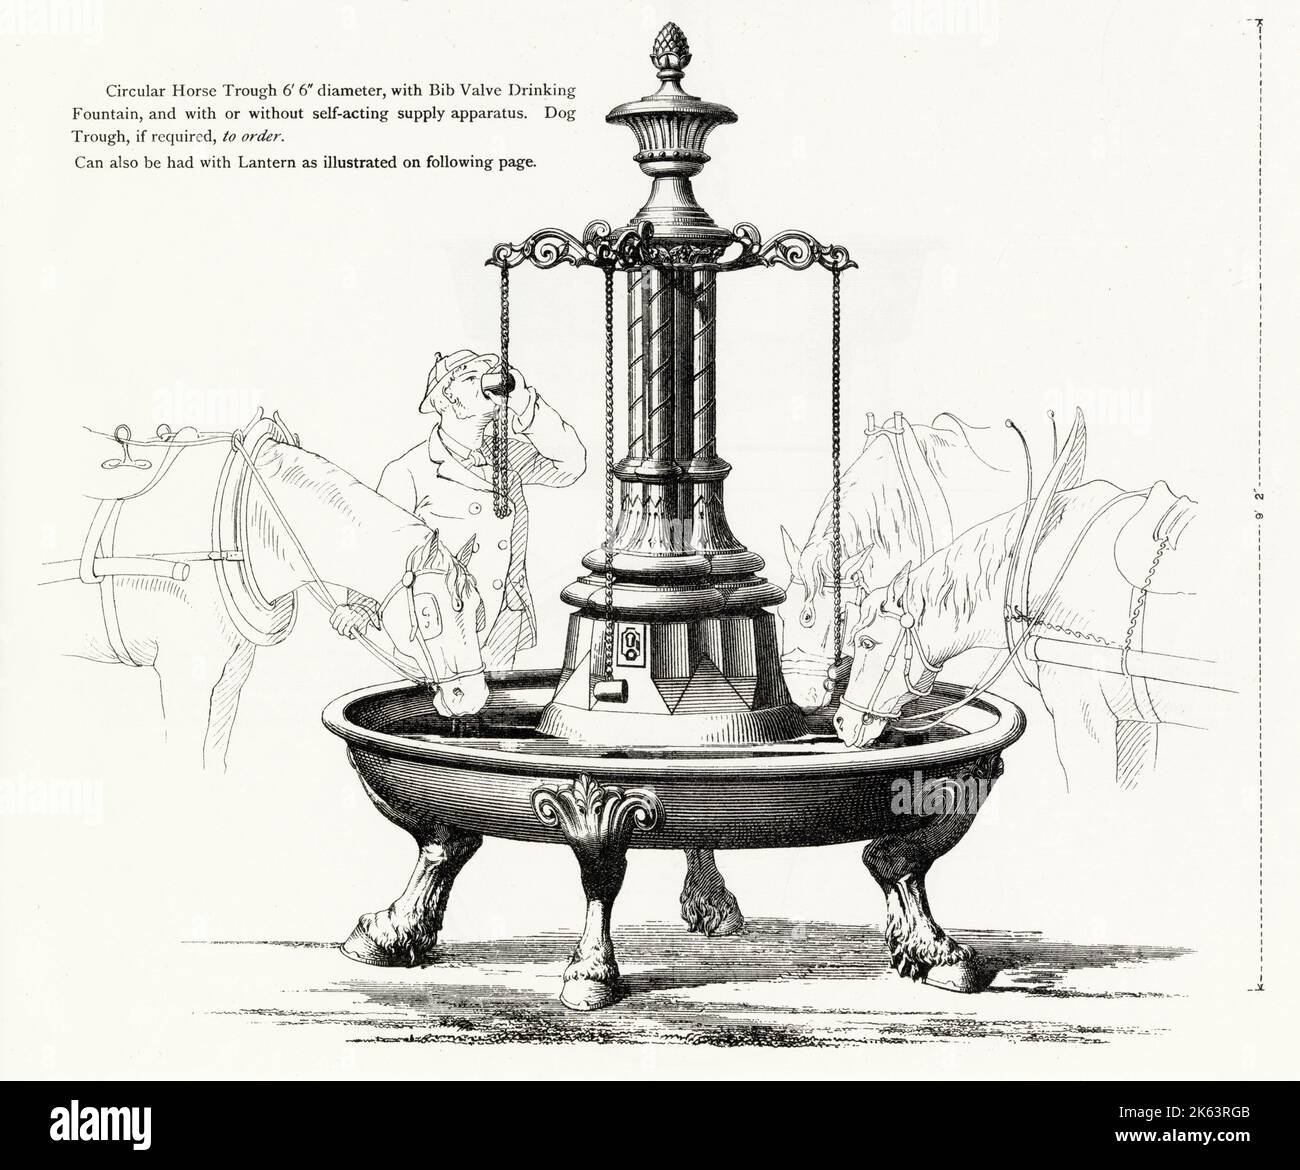 Cast iron circular horse trough with drinking fountain. Stock Photo